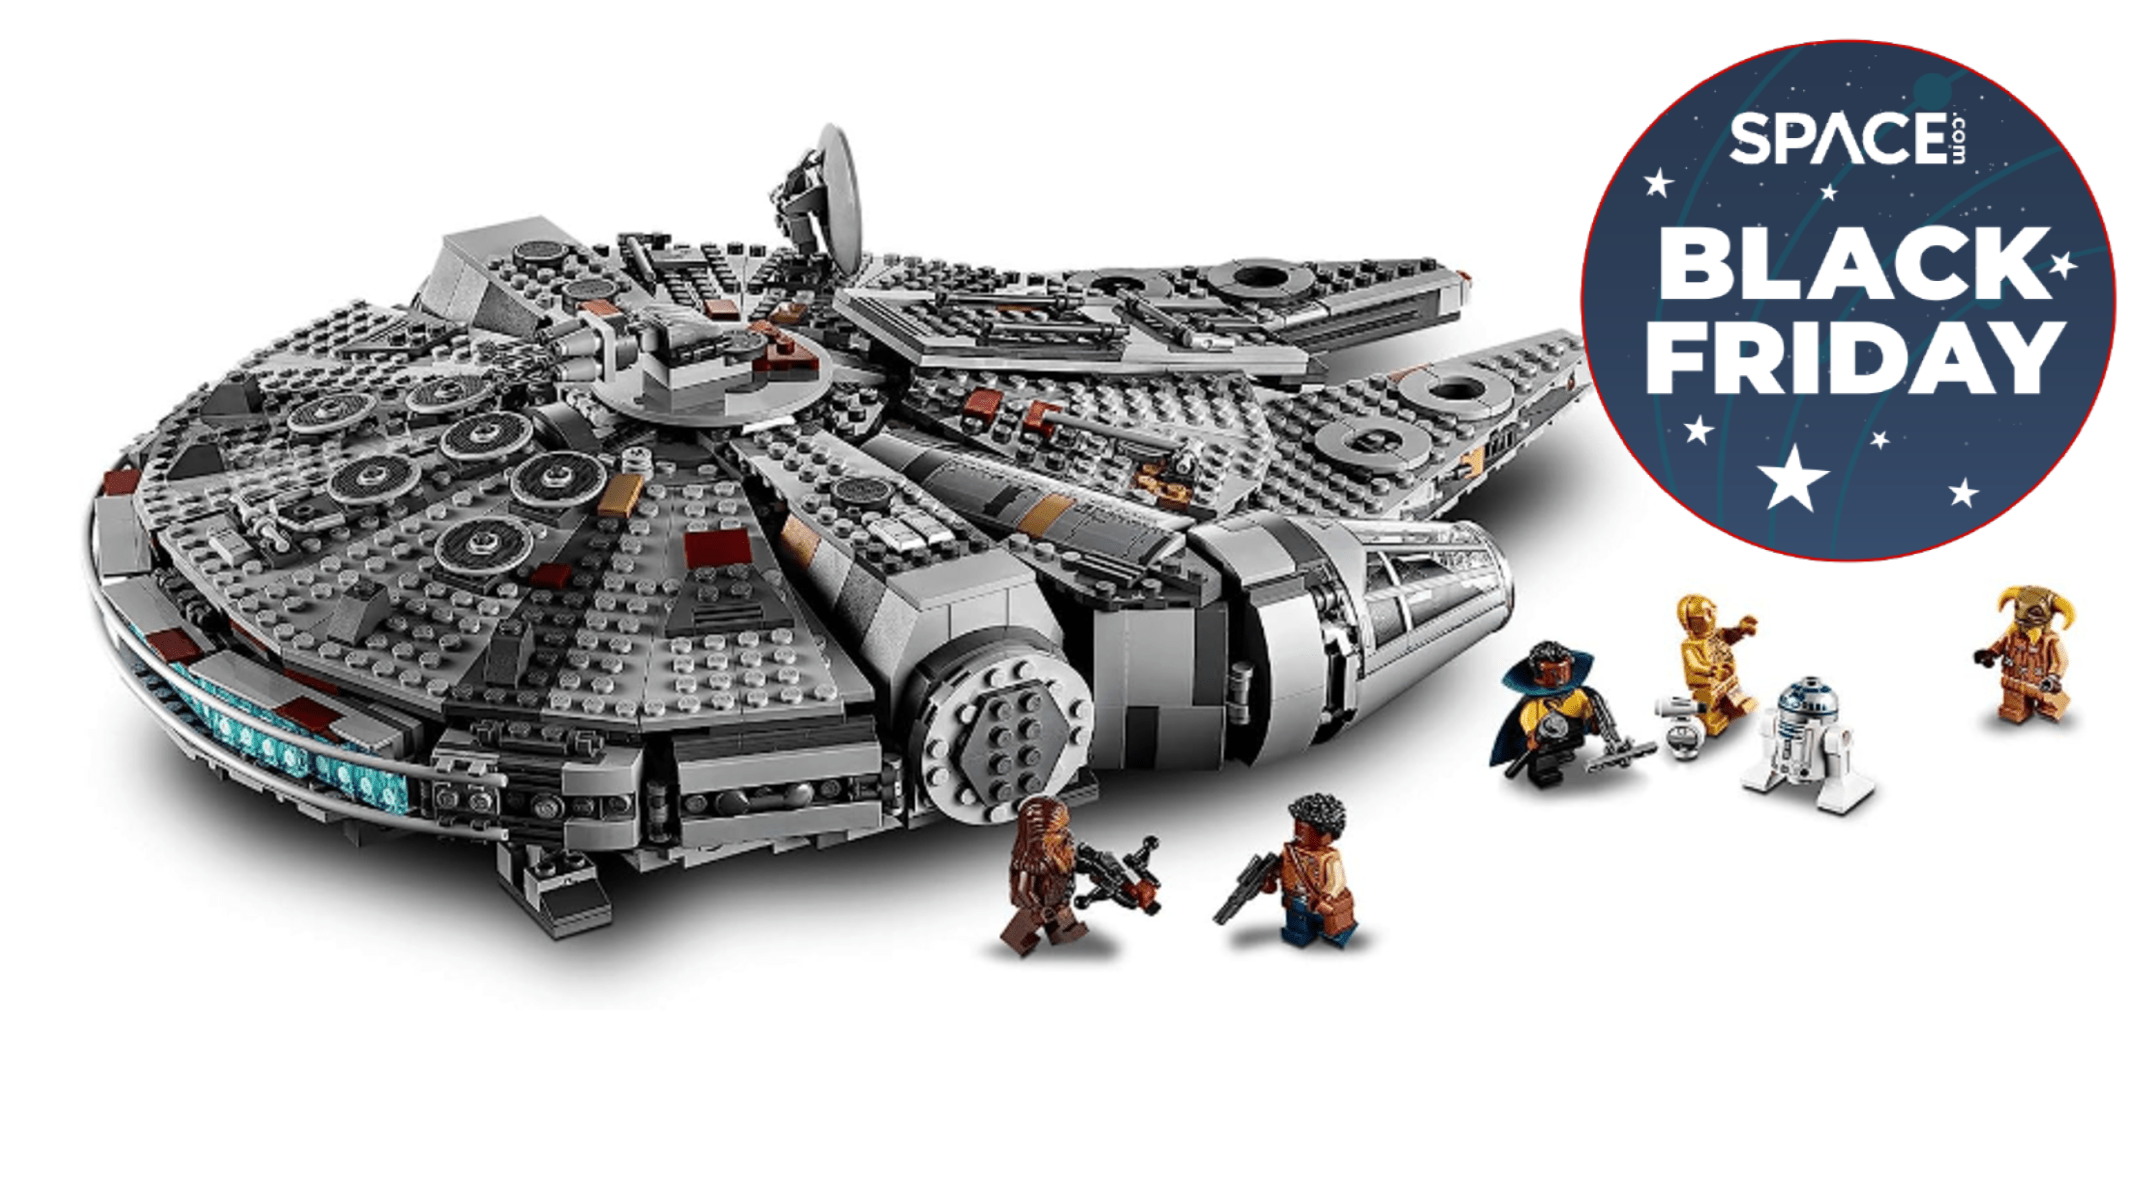 Save 20% on the Lego Star Wars Millennium Falcon set this Cyber Monday Space